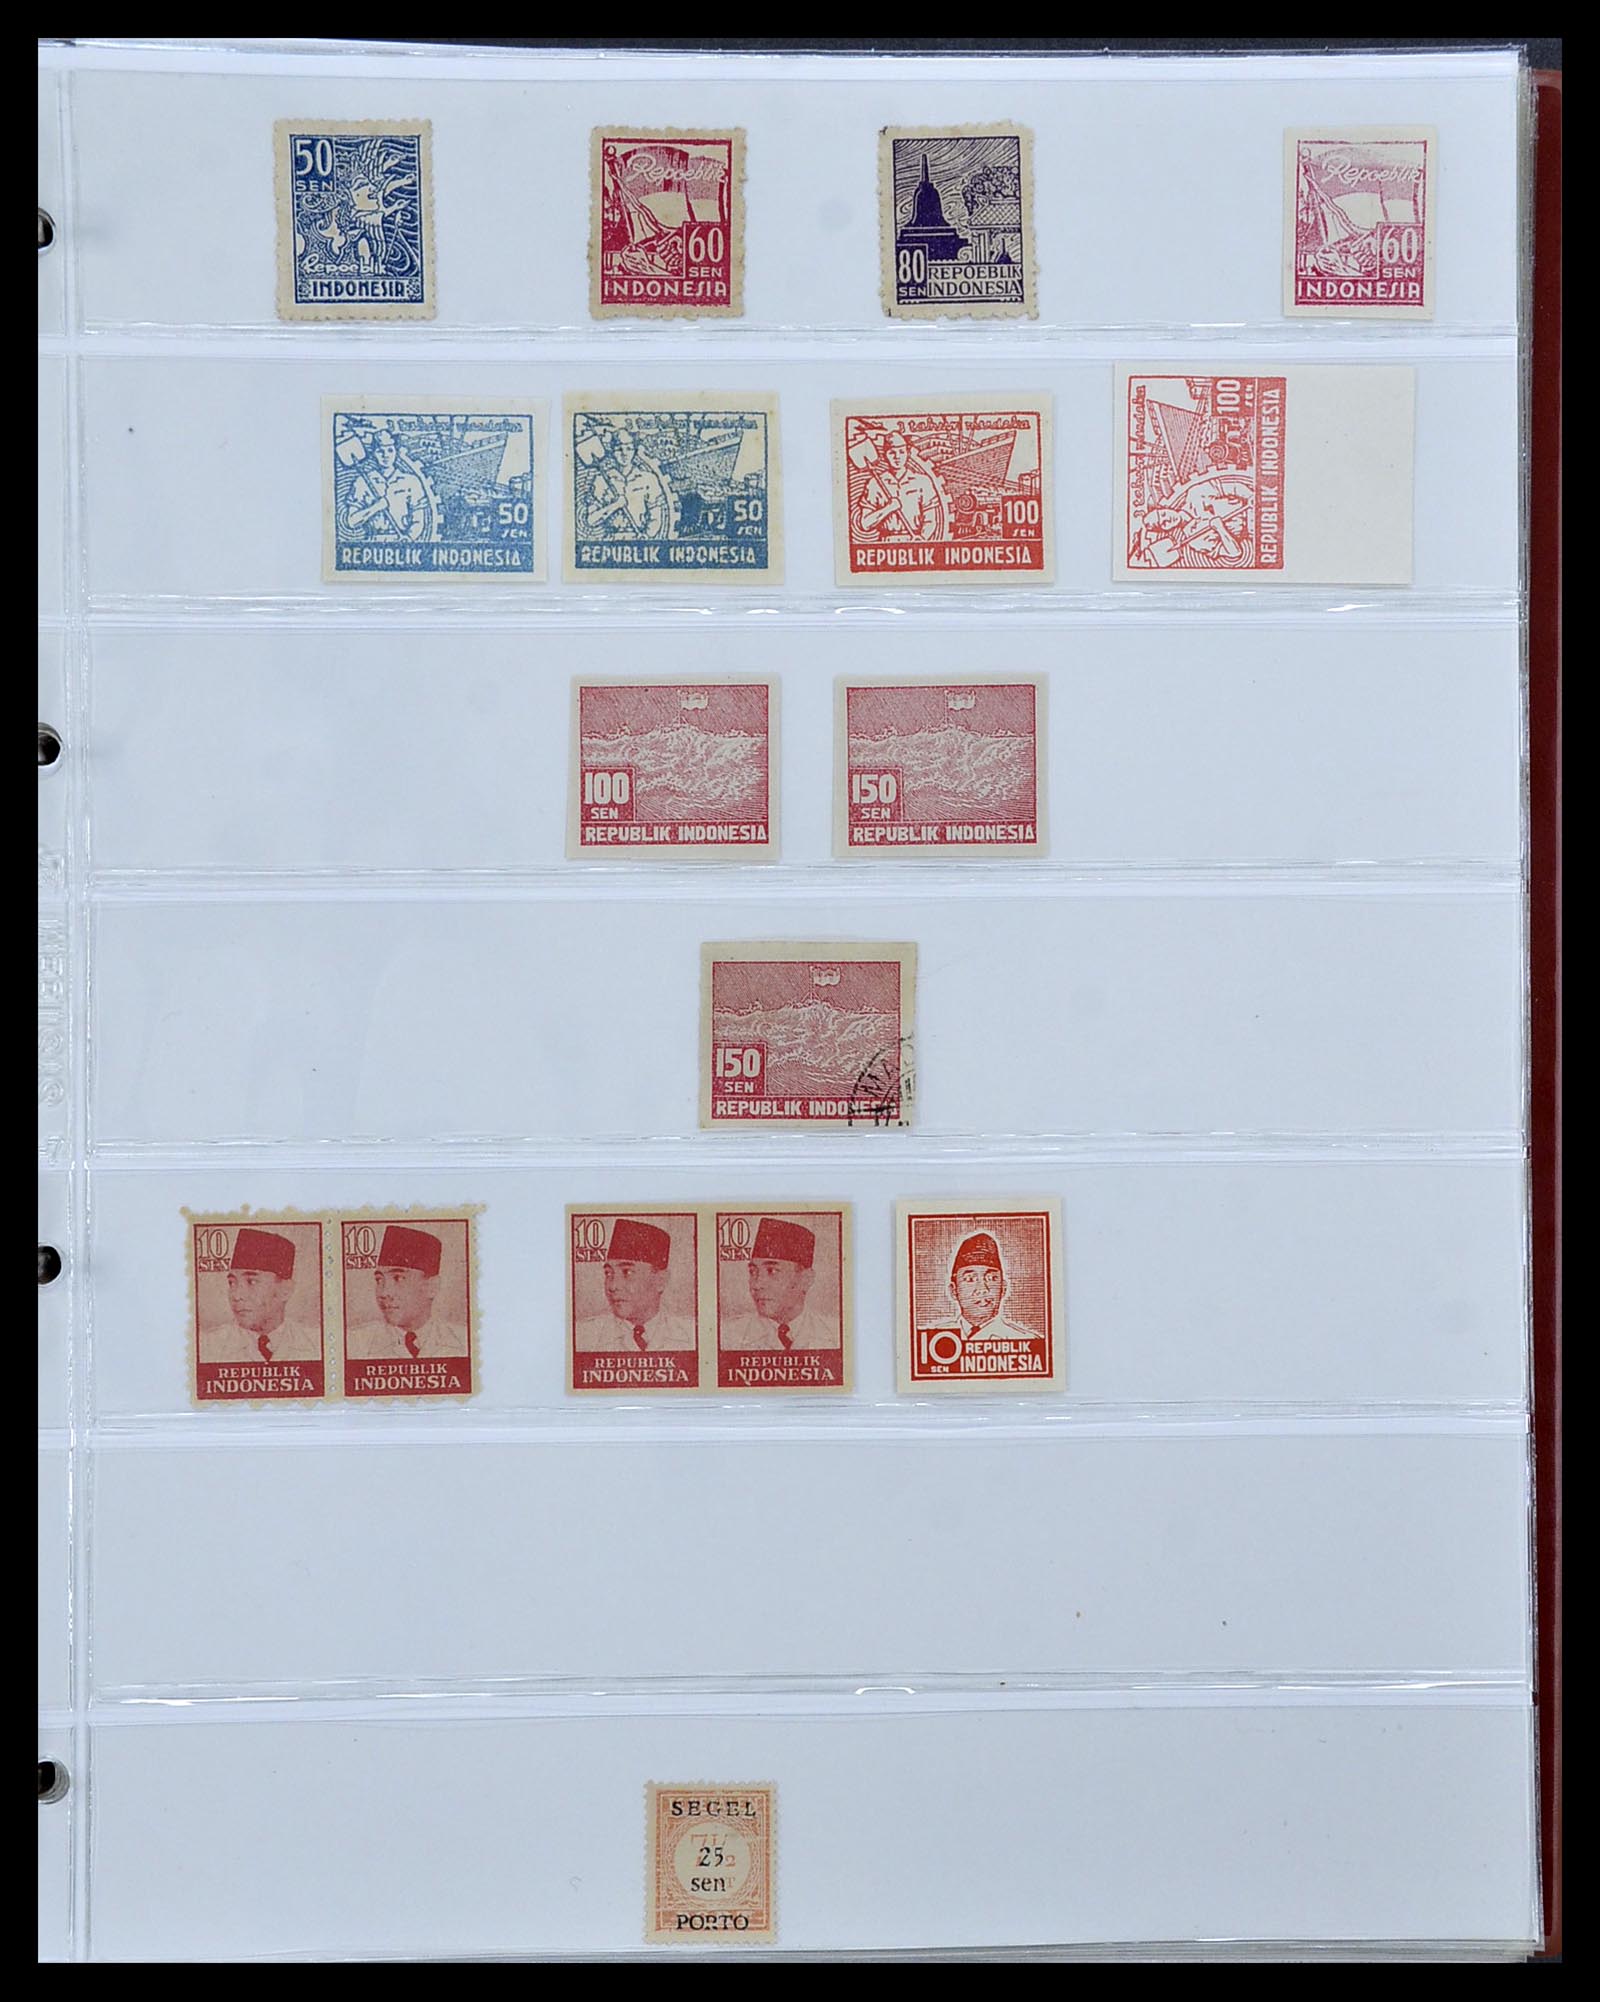 34545 071 - Stamp Collection 34545 Japanese Occupation of the Dutch East Indies and 